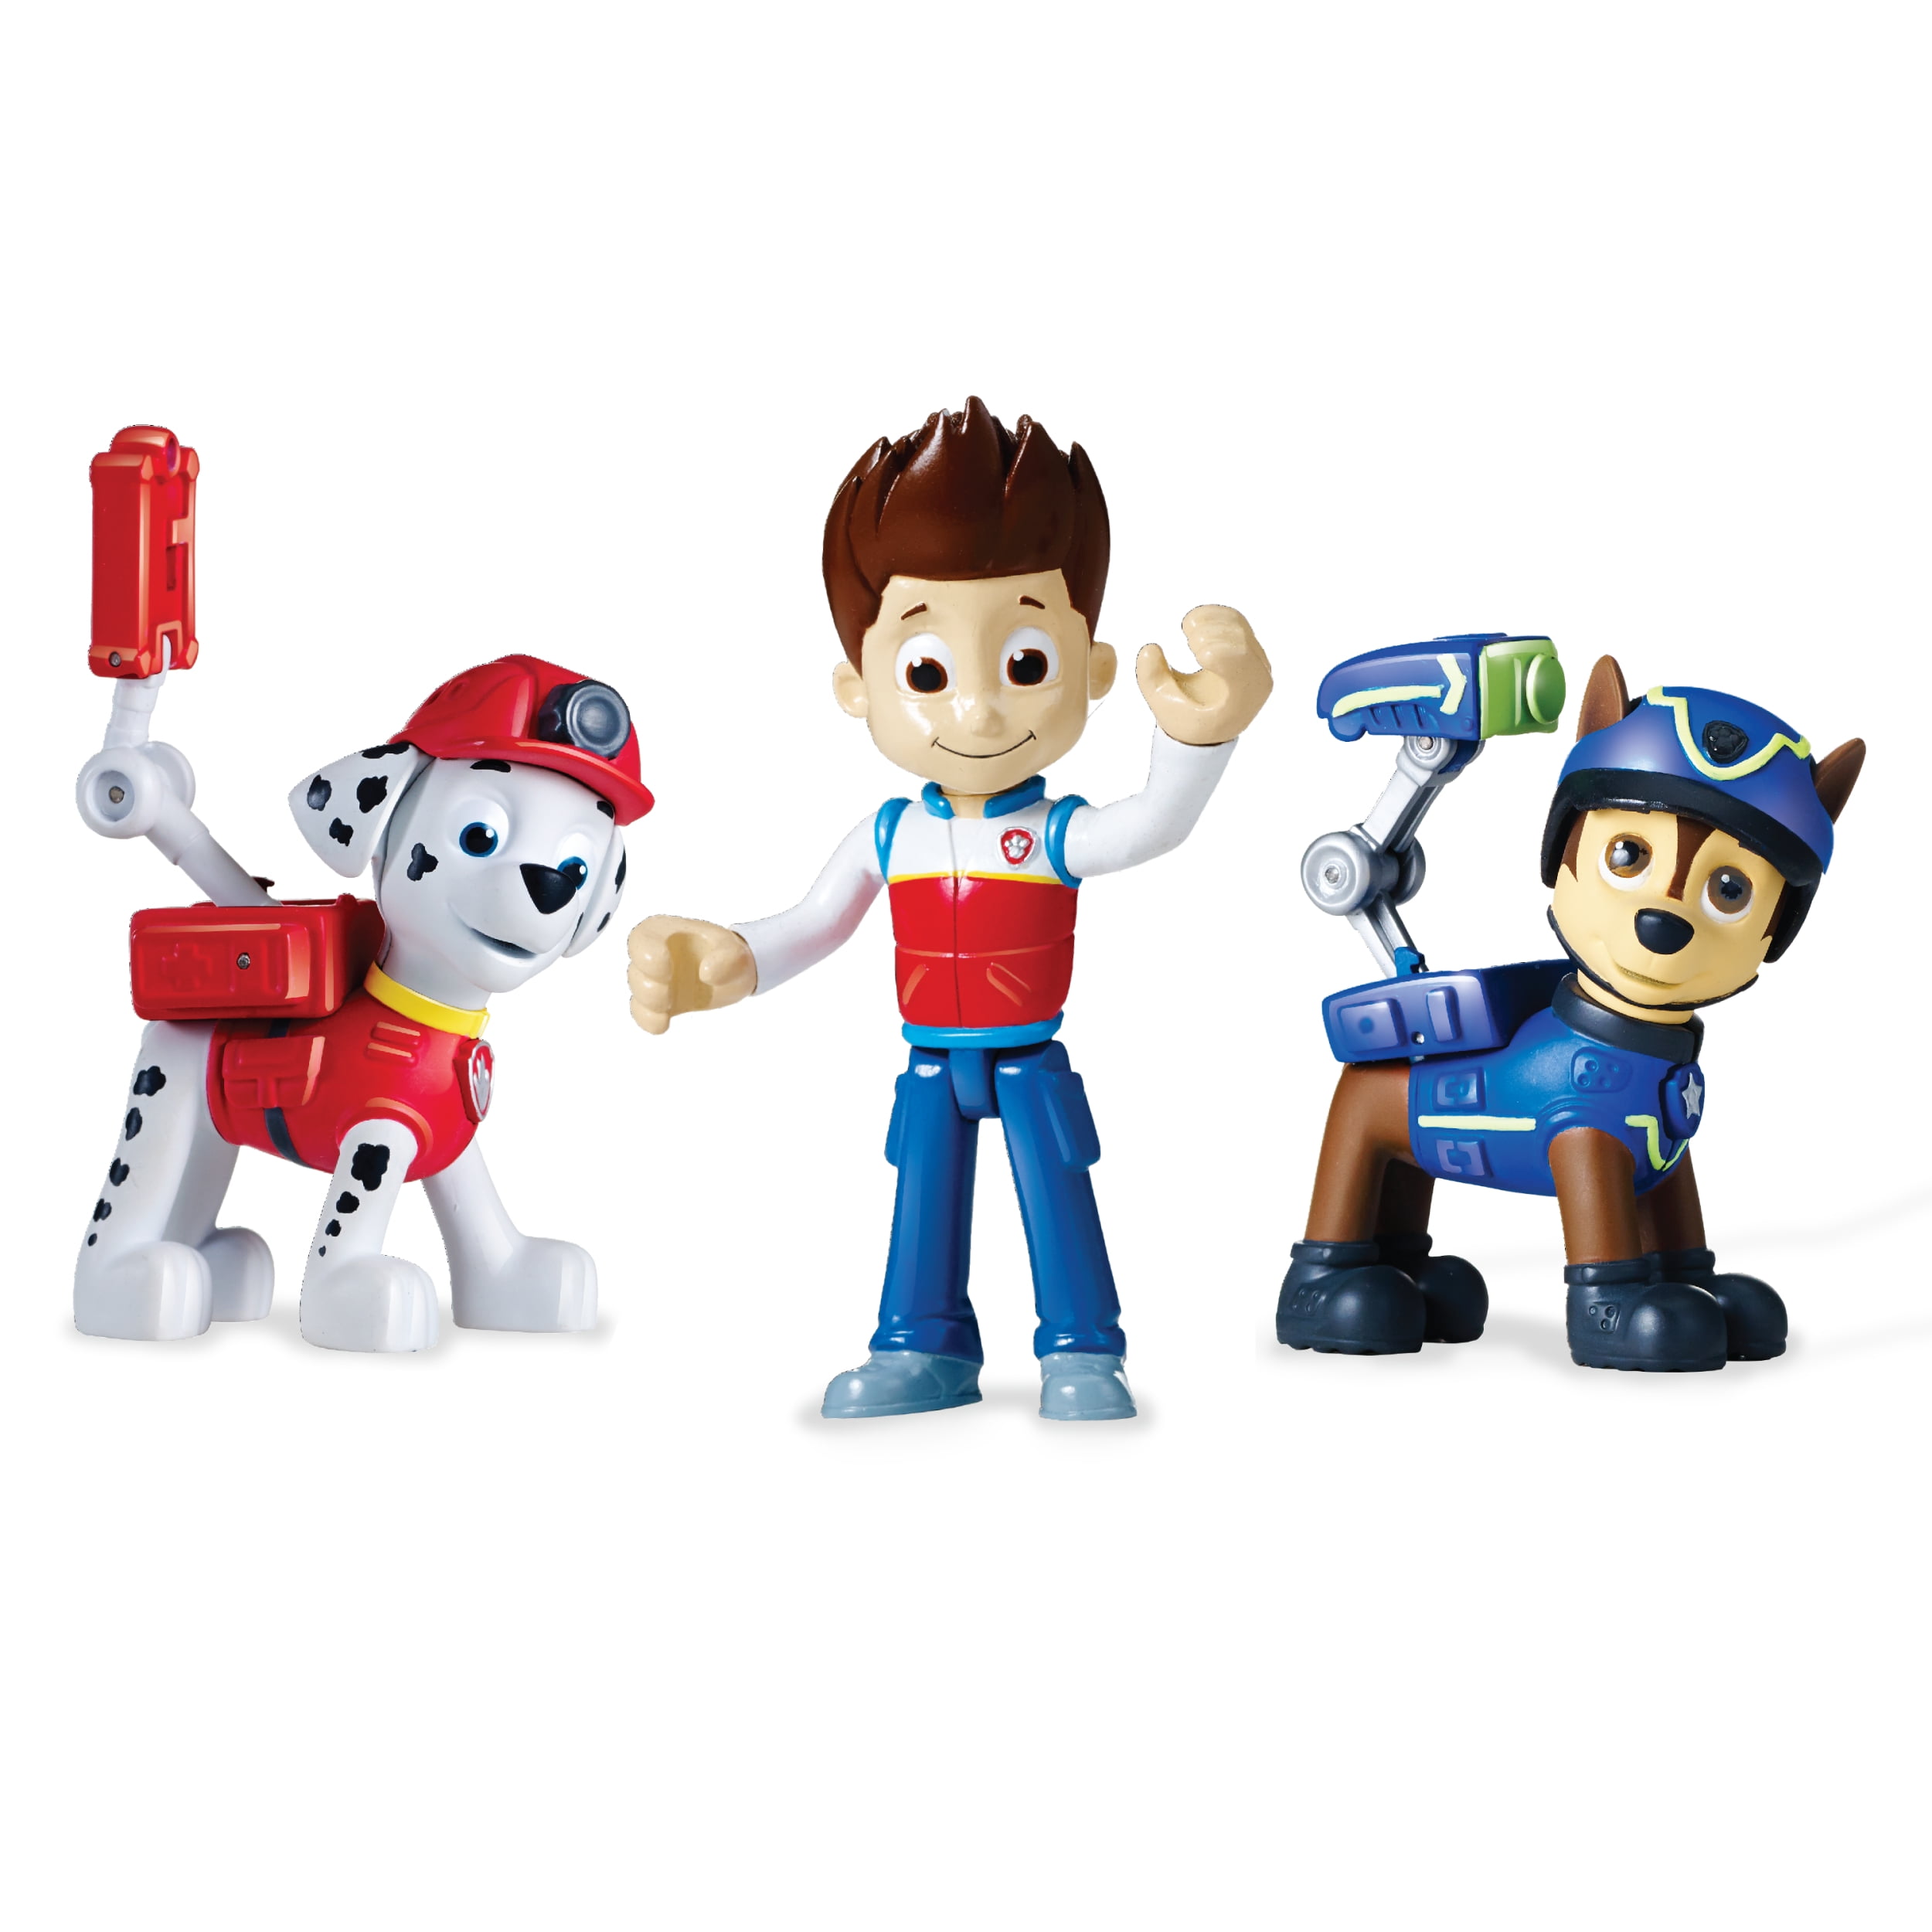 Nickelodeon, Paw Patrol - Ryder's Rescue ATV, Vehicle and Figure (works with Paw Patroller) -